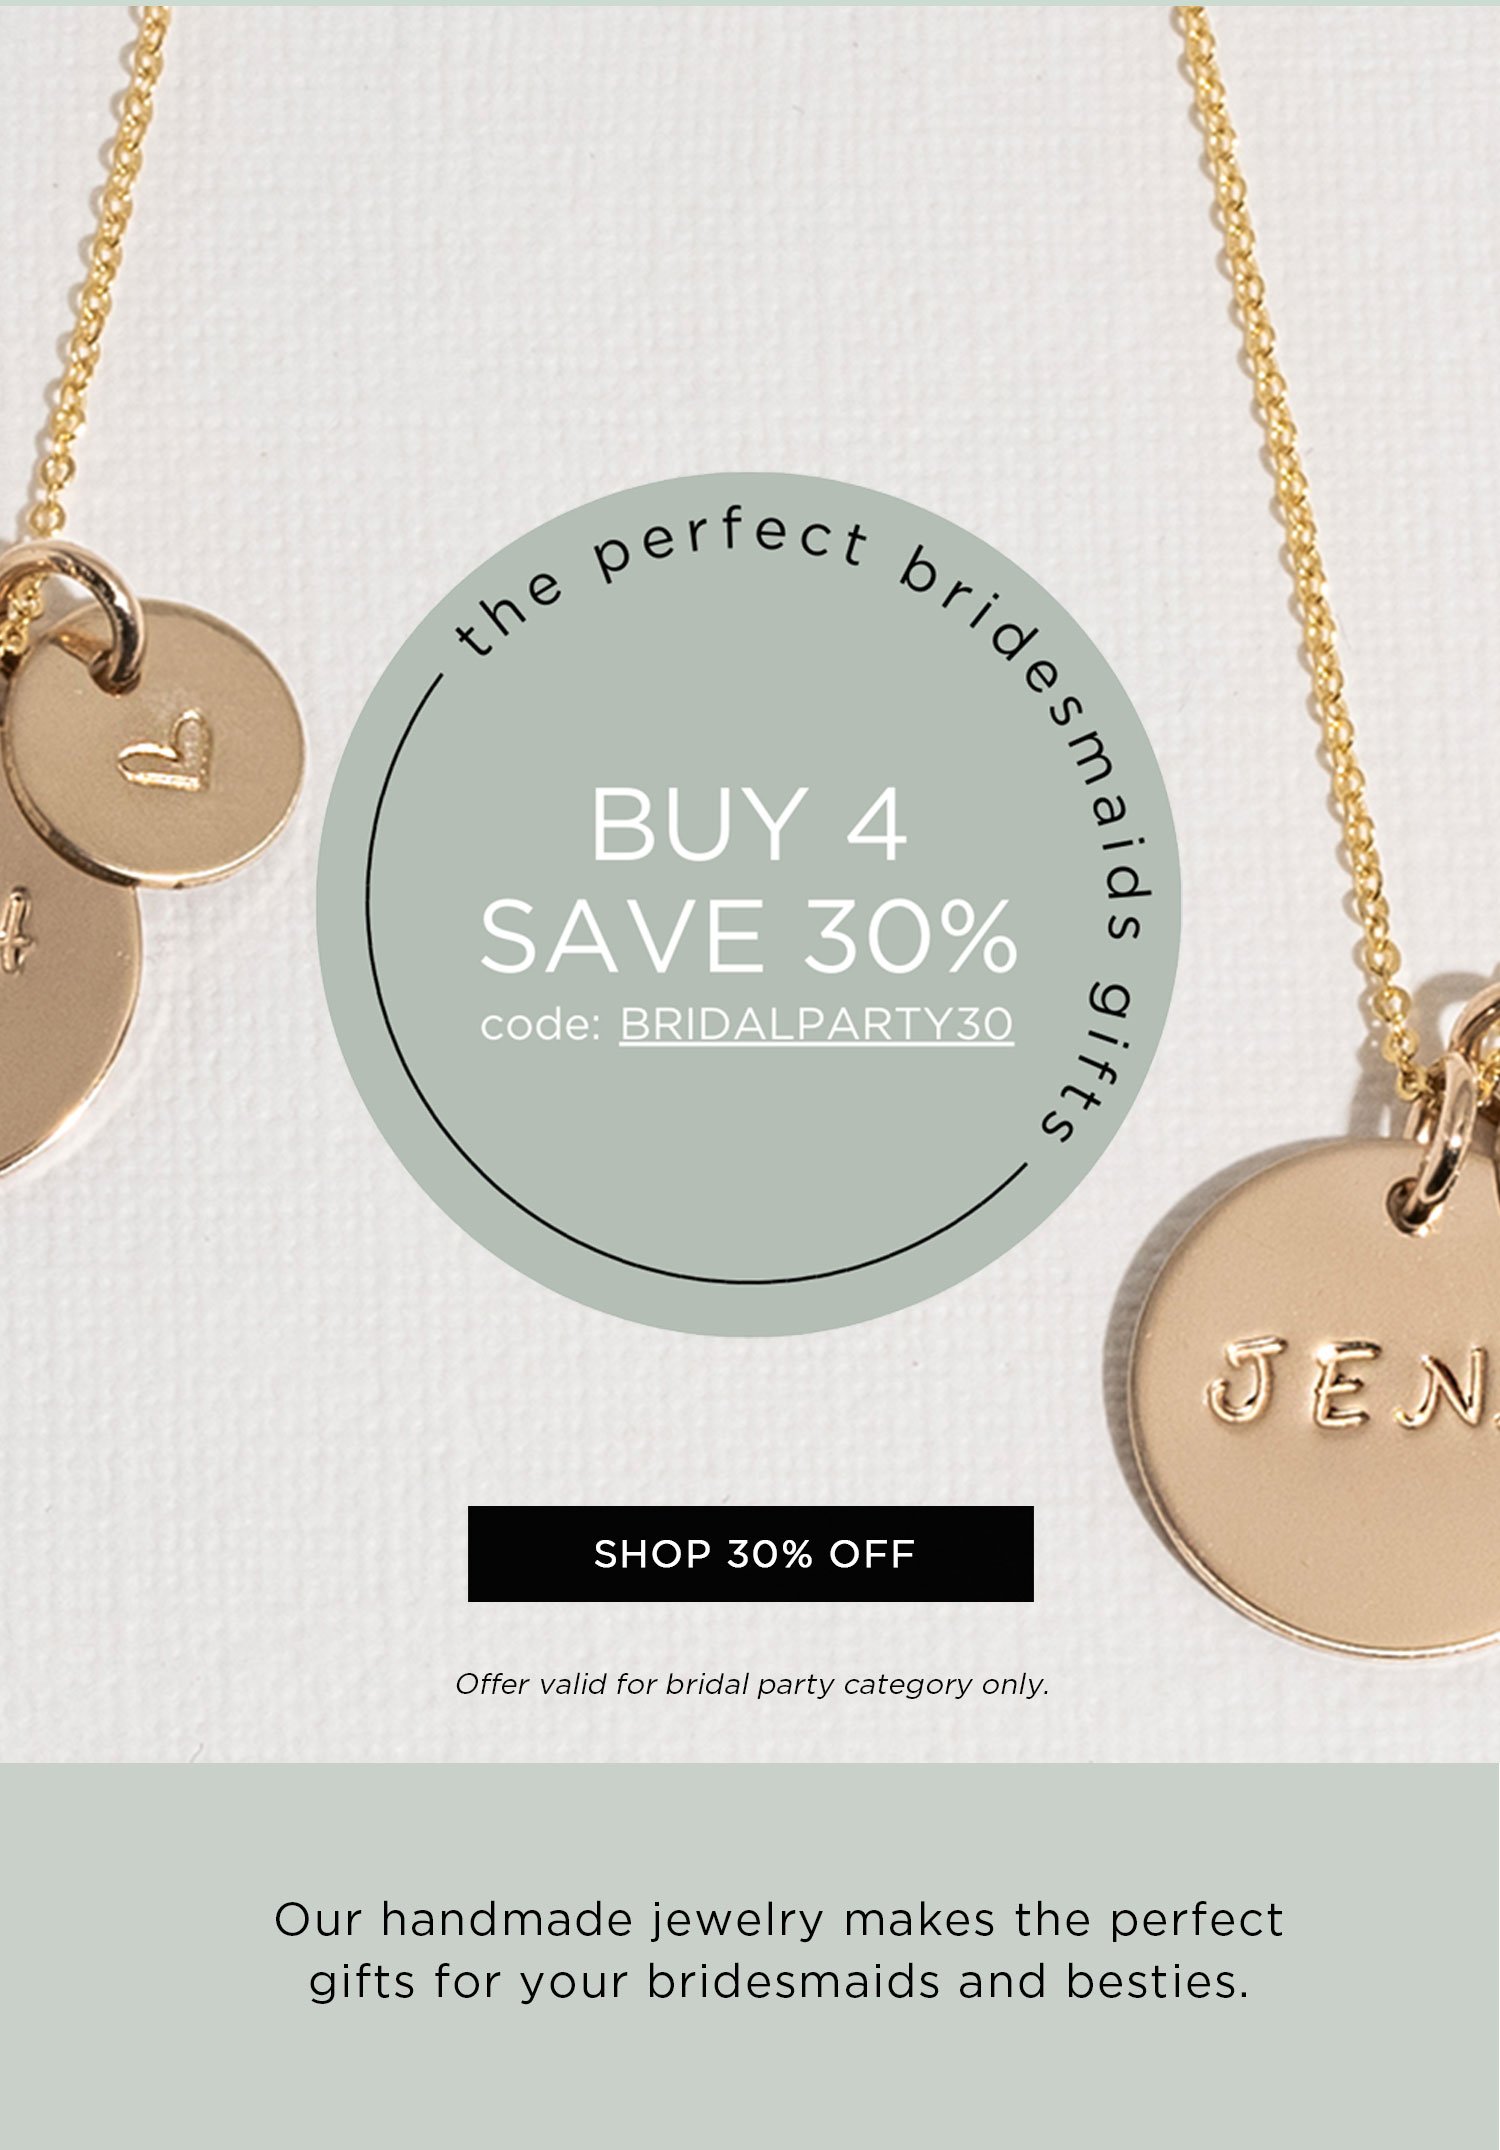 The perfect bridesmaid gifts | Shop 30% OFF